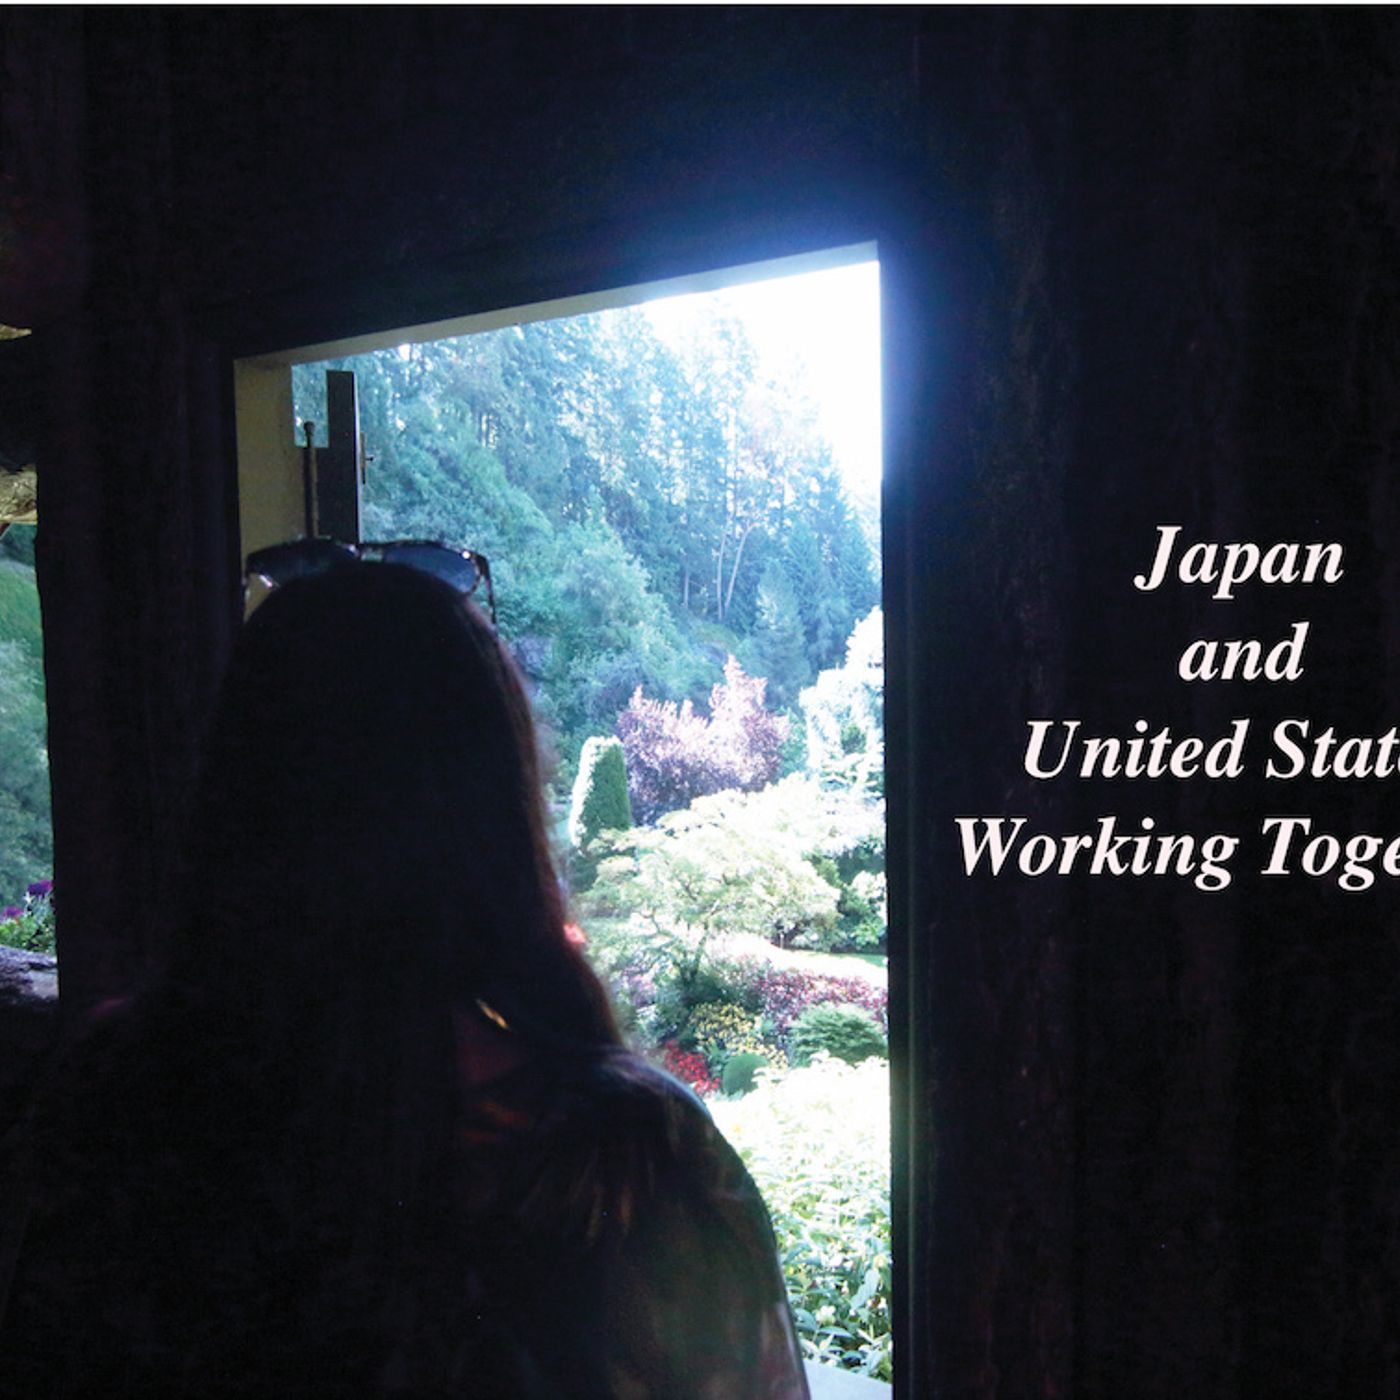 Japan and Unites States Working Together